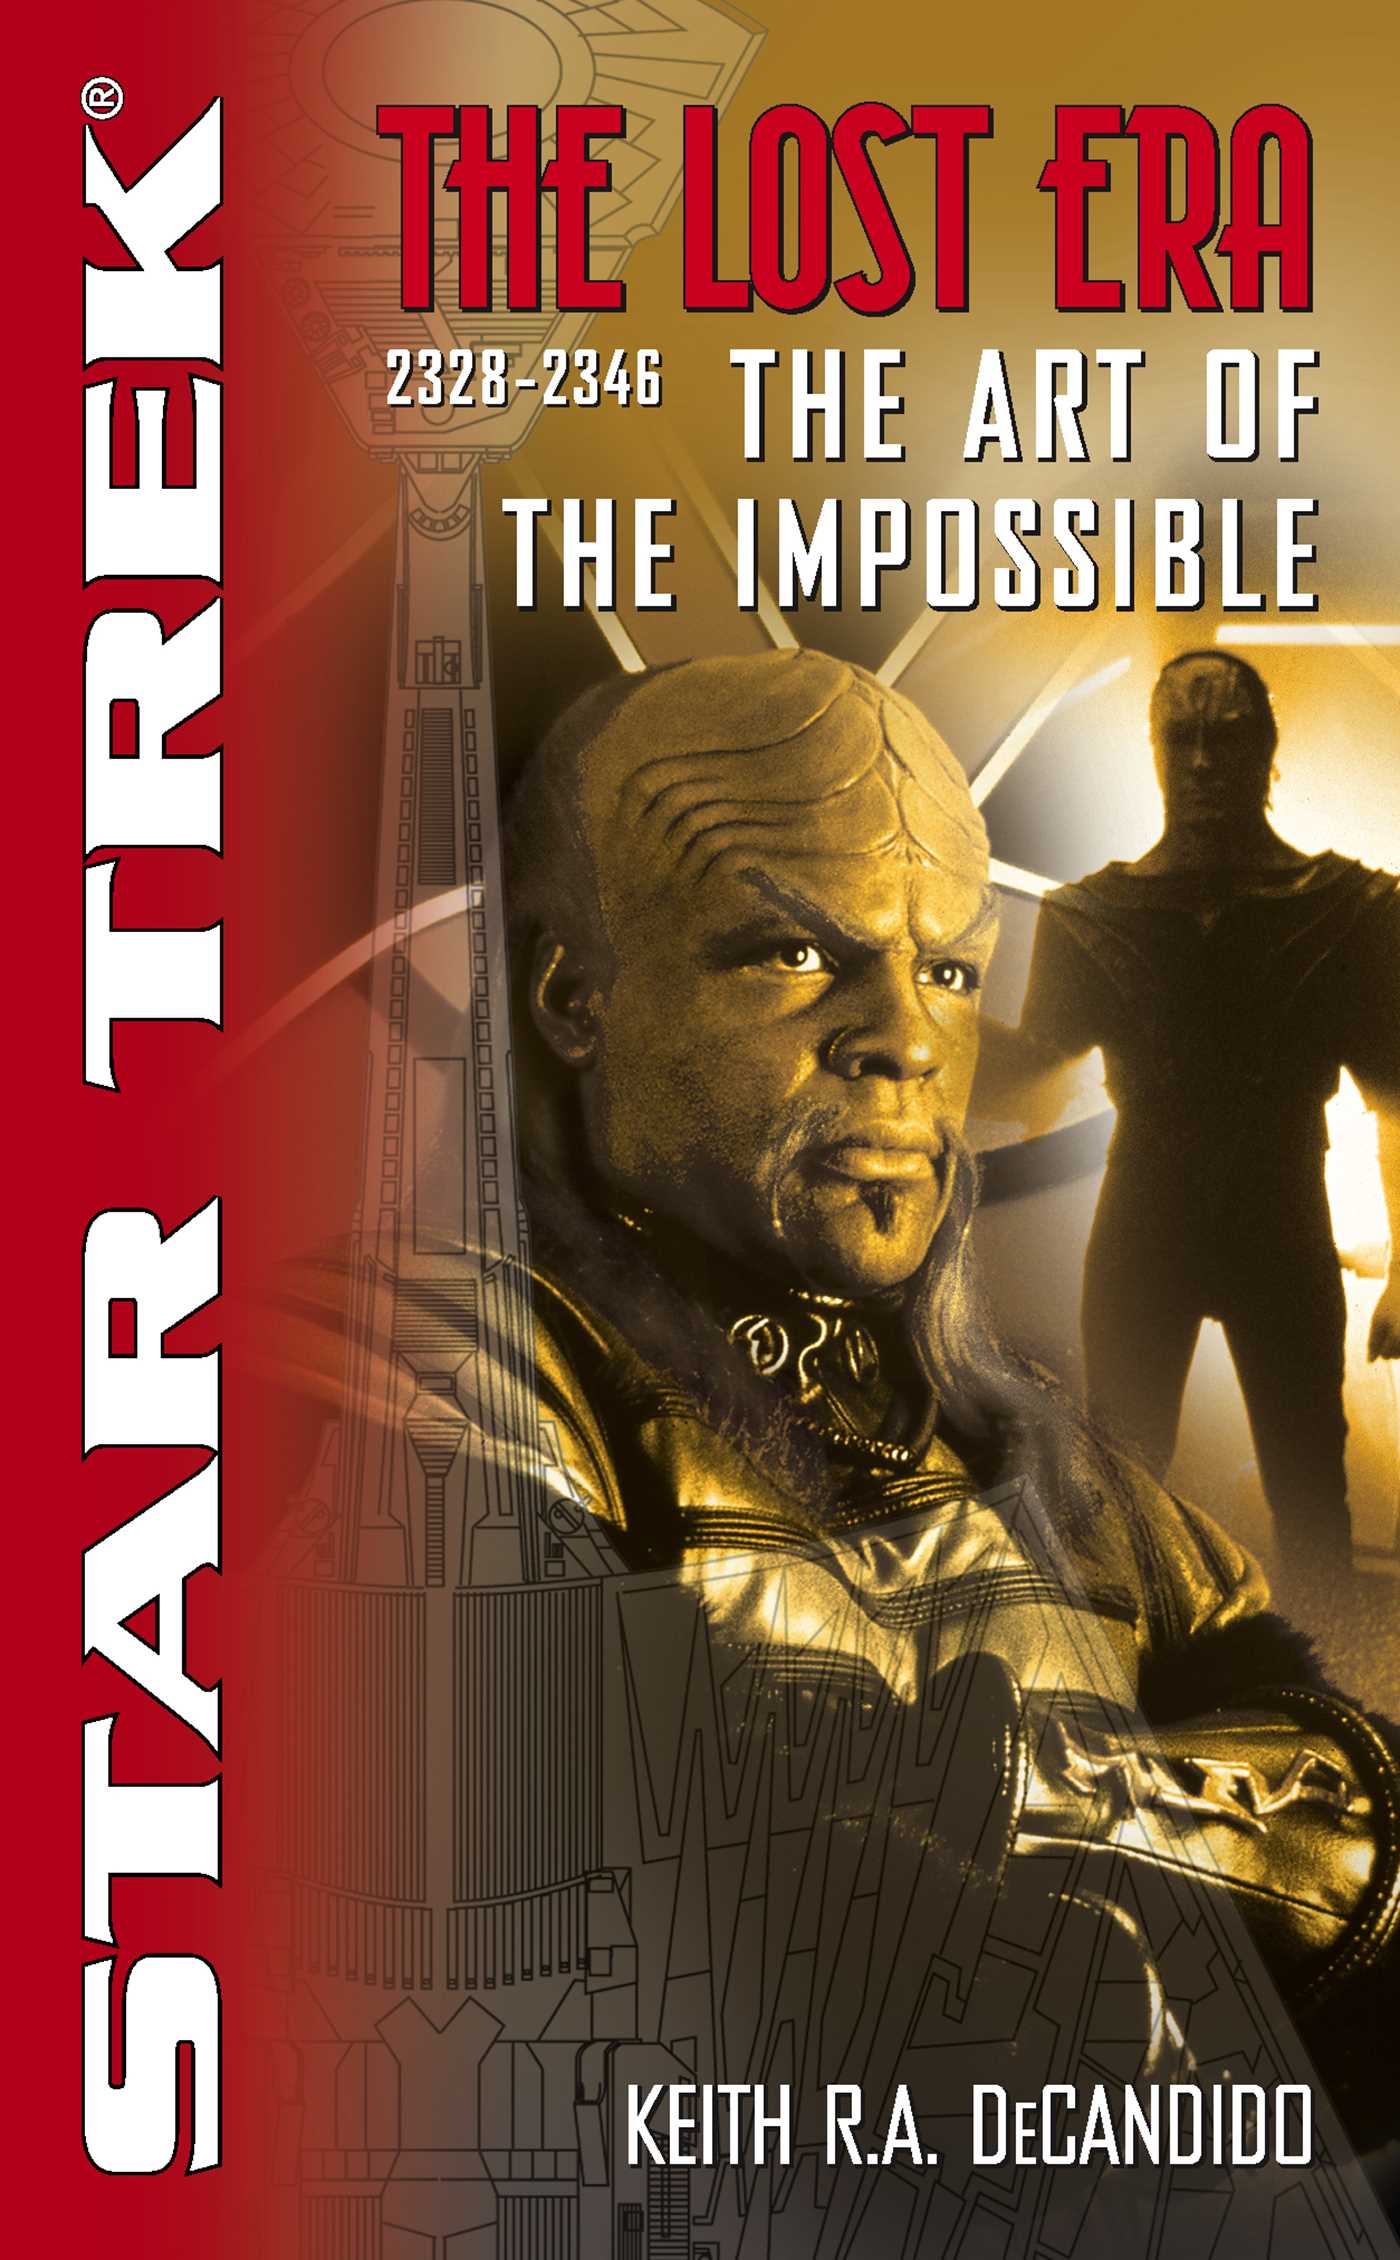 “Star Trek: The Lost Era: The Art Of The Impossible” Review by Positivelytrek.libsyn.com